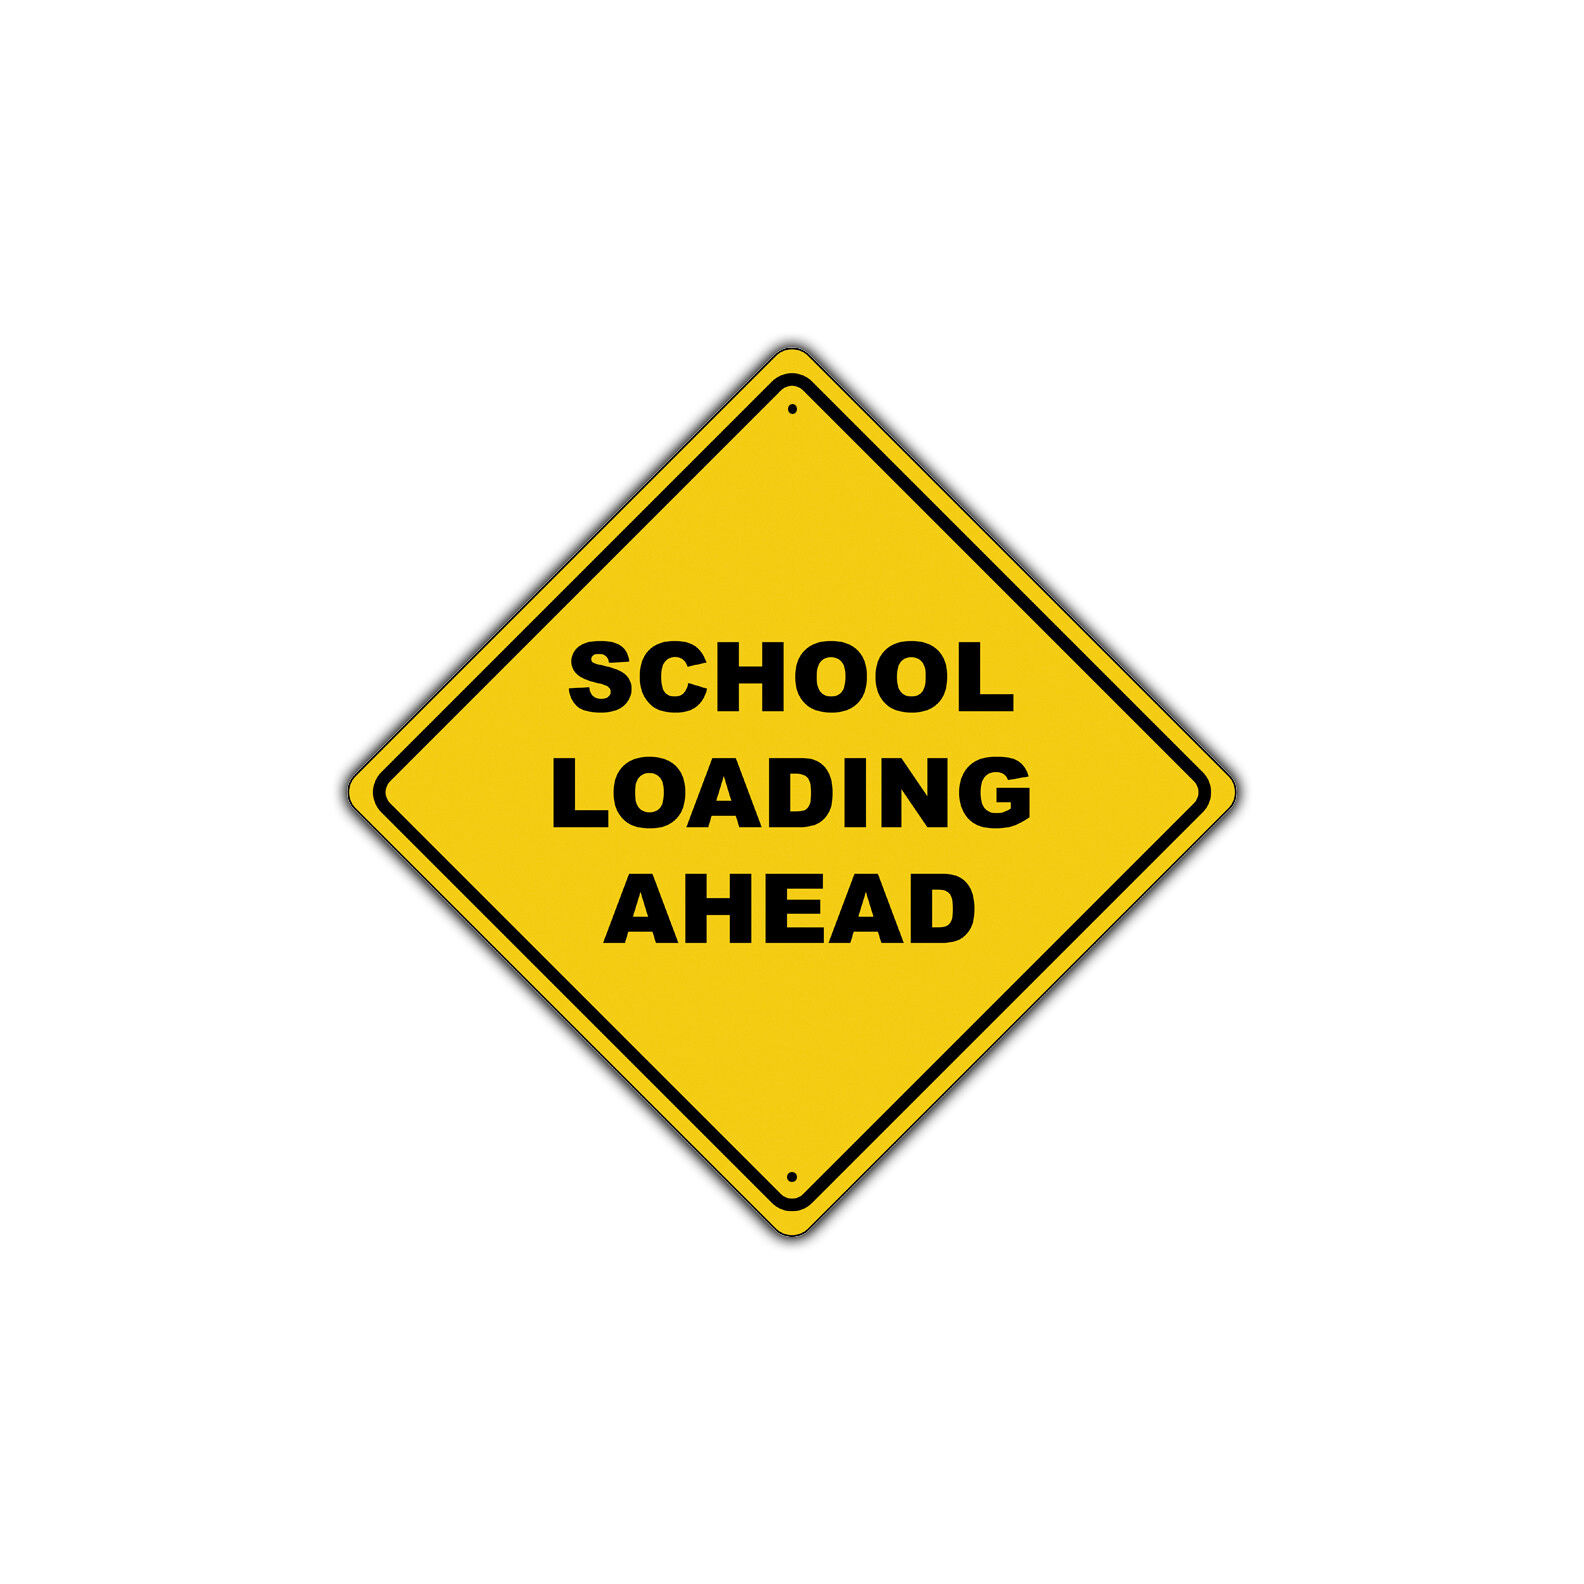 School Loading Ahead Crossing Novelty Safety Notice Aluminum Metal Sign